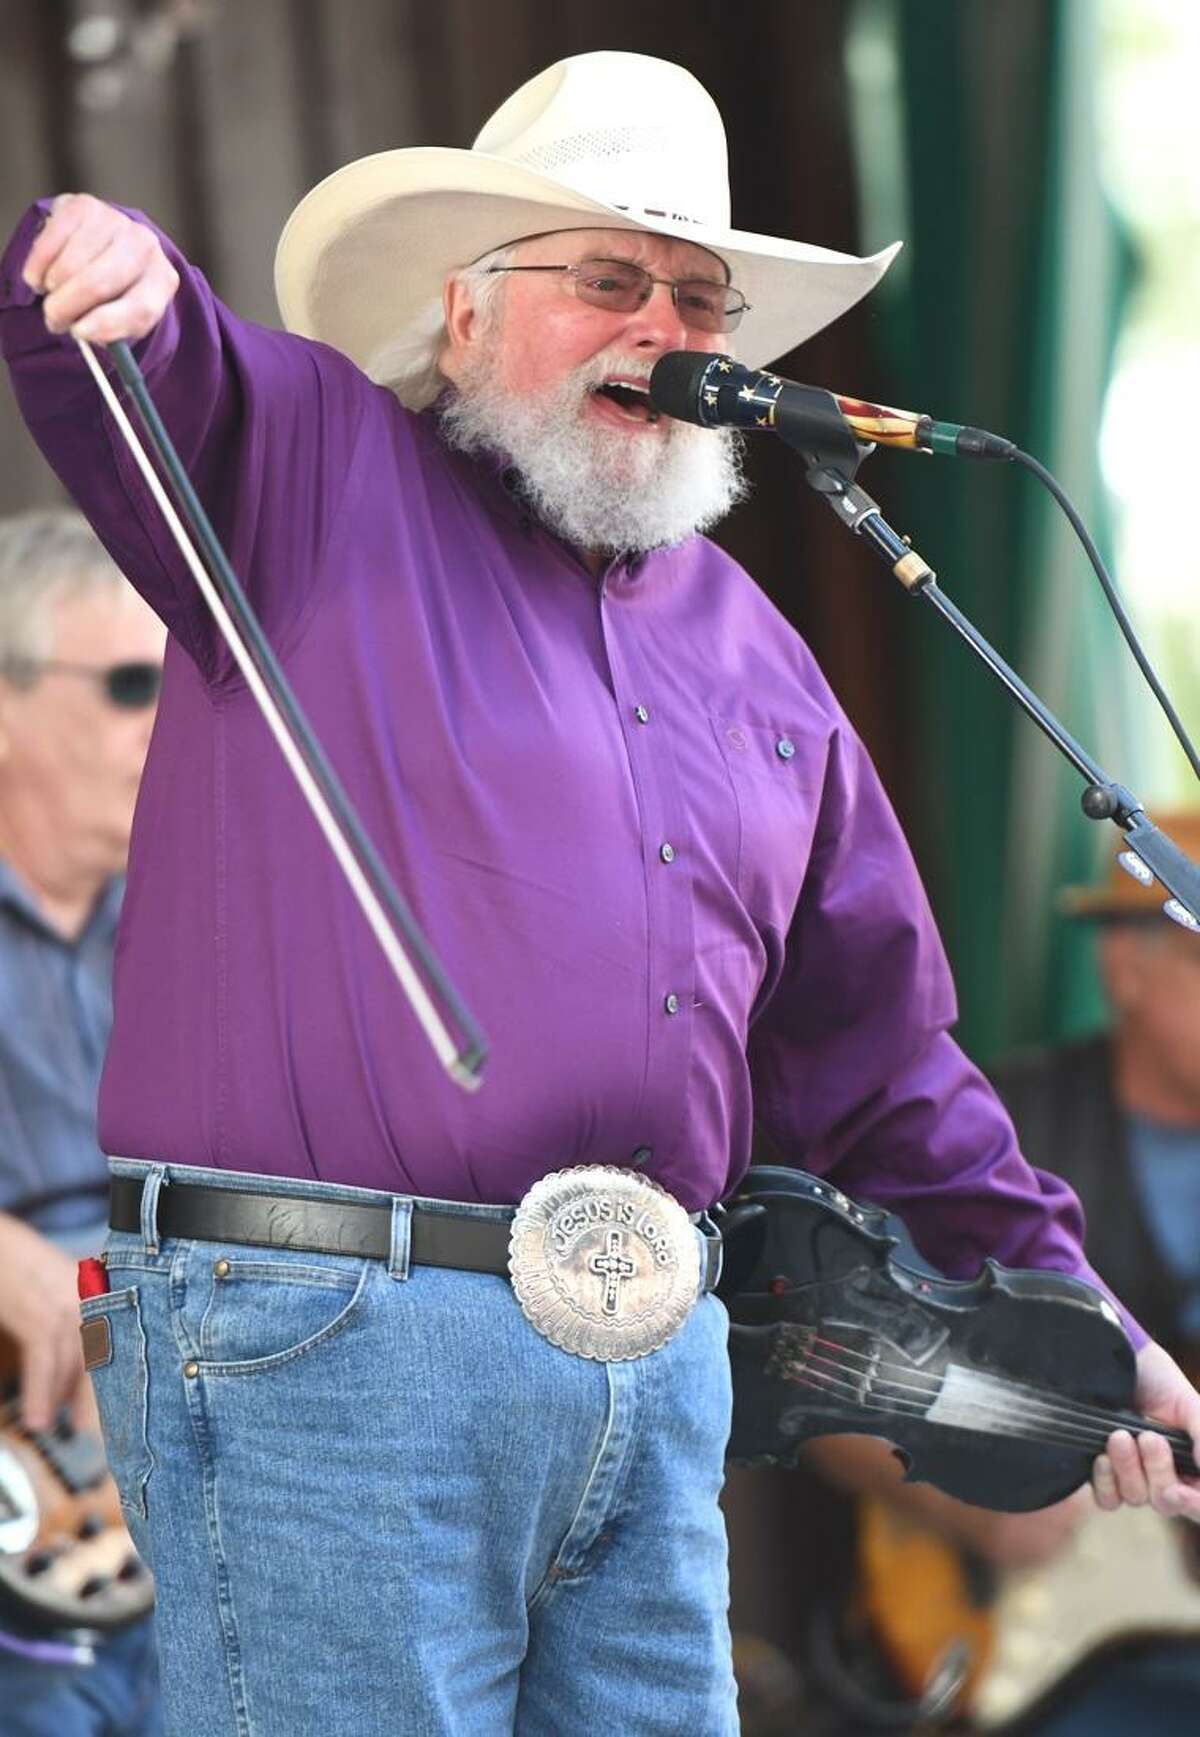 Singer, songwriter and multi-instrumentalist, Charlie Daniels is shown in action during his recent performance at the Indian Ranch Amphitheater in Webster, Massachusetts on Sept. 9. The 80-year old musician, perhaps best known for his number one country hit ?“The Devil Went Down To Georgia,?” has been an active singer, musician and touring artist since the 1950?’s. He was inducted into the Grand Ole Opry on Jan. 24, 2008and the ?“Musicians Hall of Fame and Museum?” in 2009. Daniels was inducted into the ?“Country Music Hall" of Fame in 2016. To learn more about the CDB 45th Anniversary Fiddle Sweepstakes, visit www.charliedaniels.com